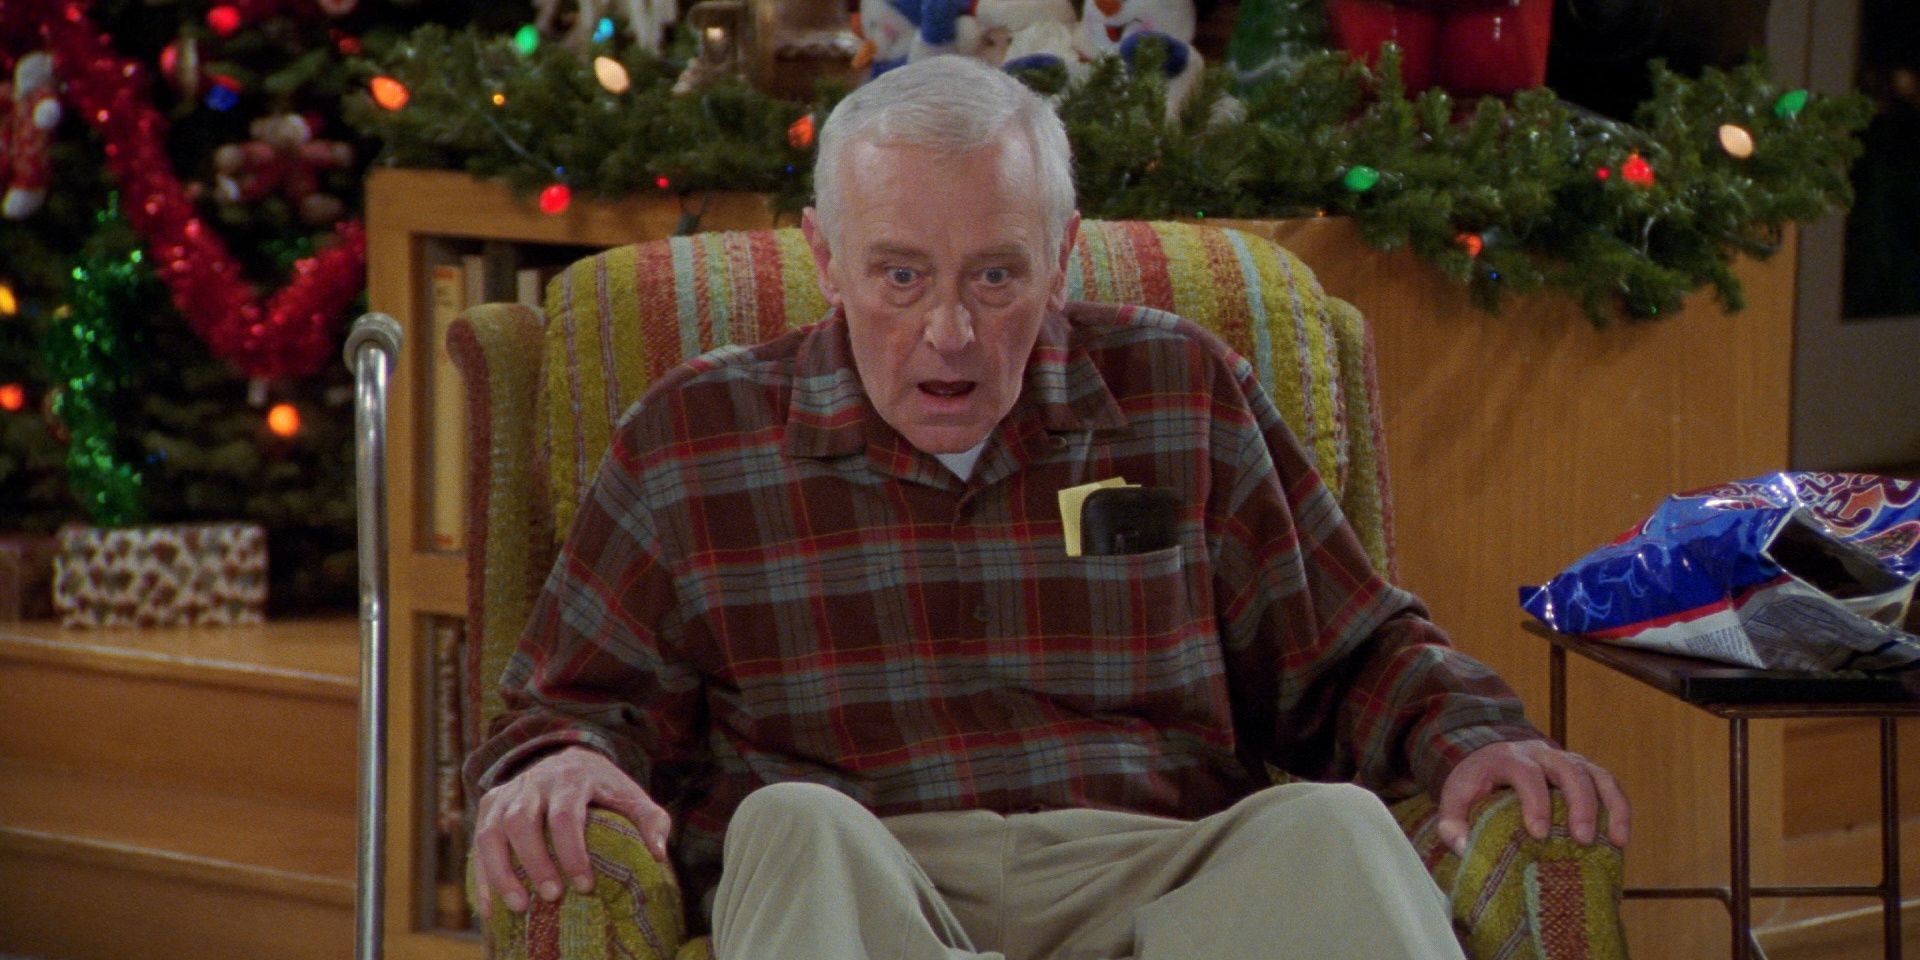 Martin Crane watching television in "High Holidays" on Frasier